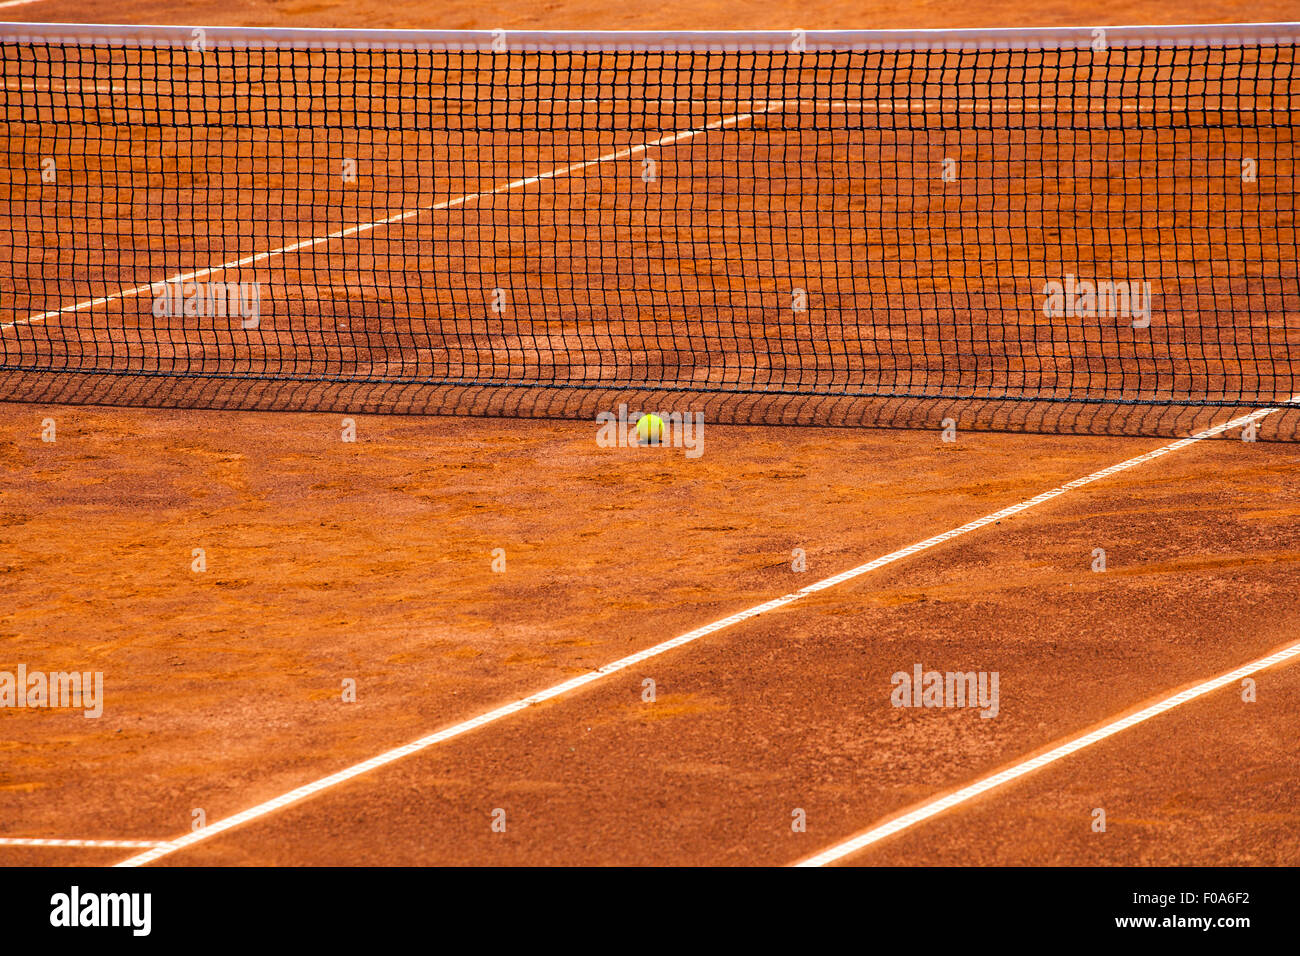 Stock image of an empty tennis court with net and yellow ball close to it. It is a clear sunny day and the court is ready before Stock Photo